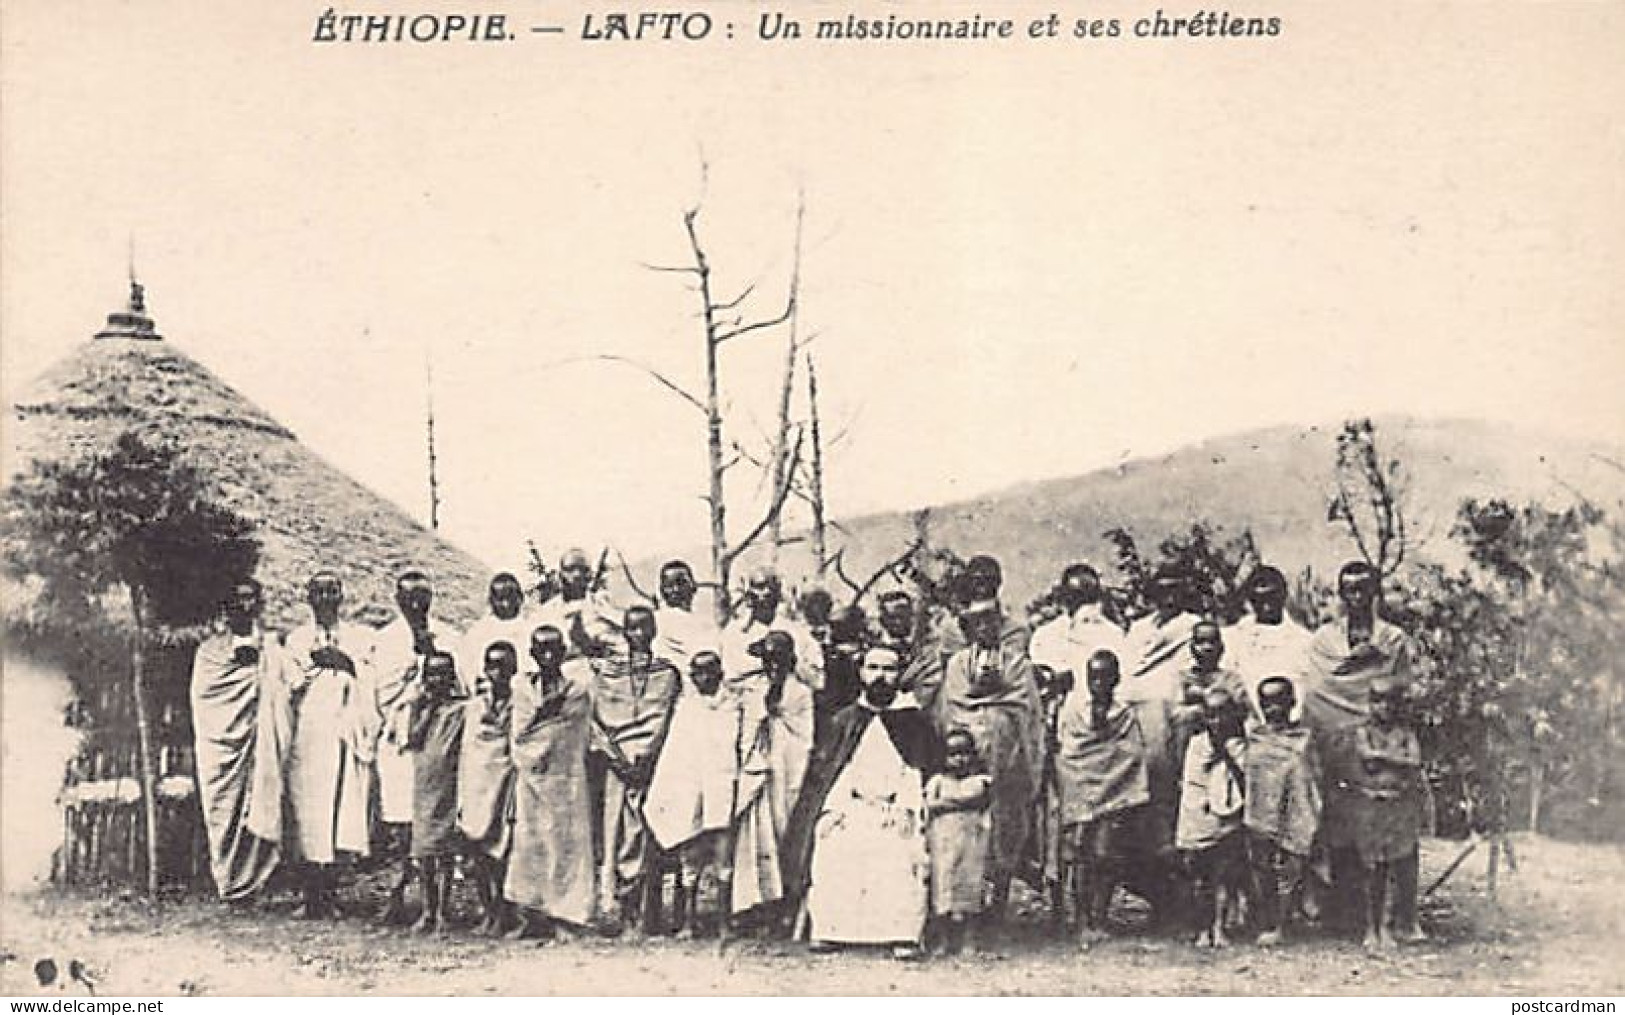 Ethiopia - LAFTO - A Missionary And His Christians - Publ. Franciscan Voices - Ethiopië